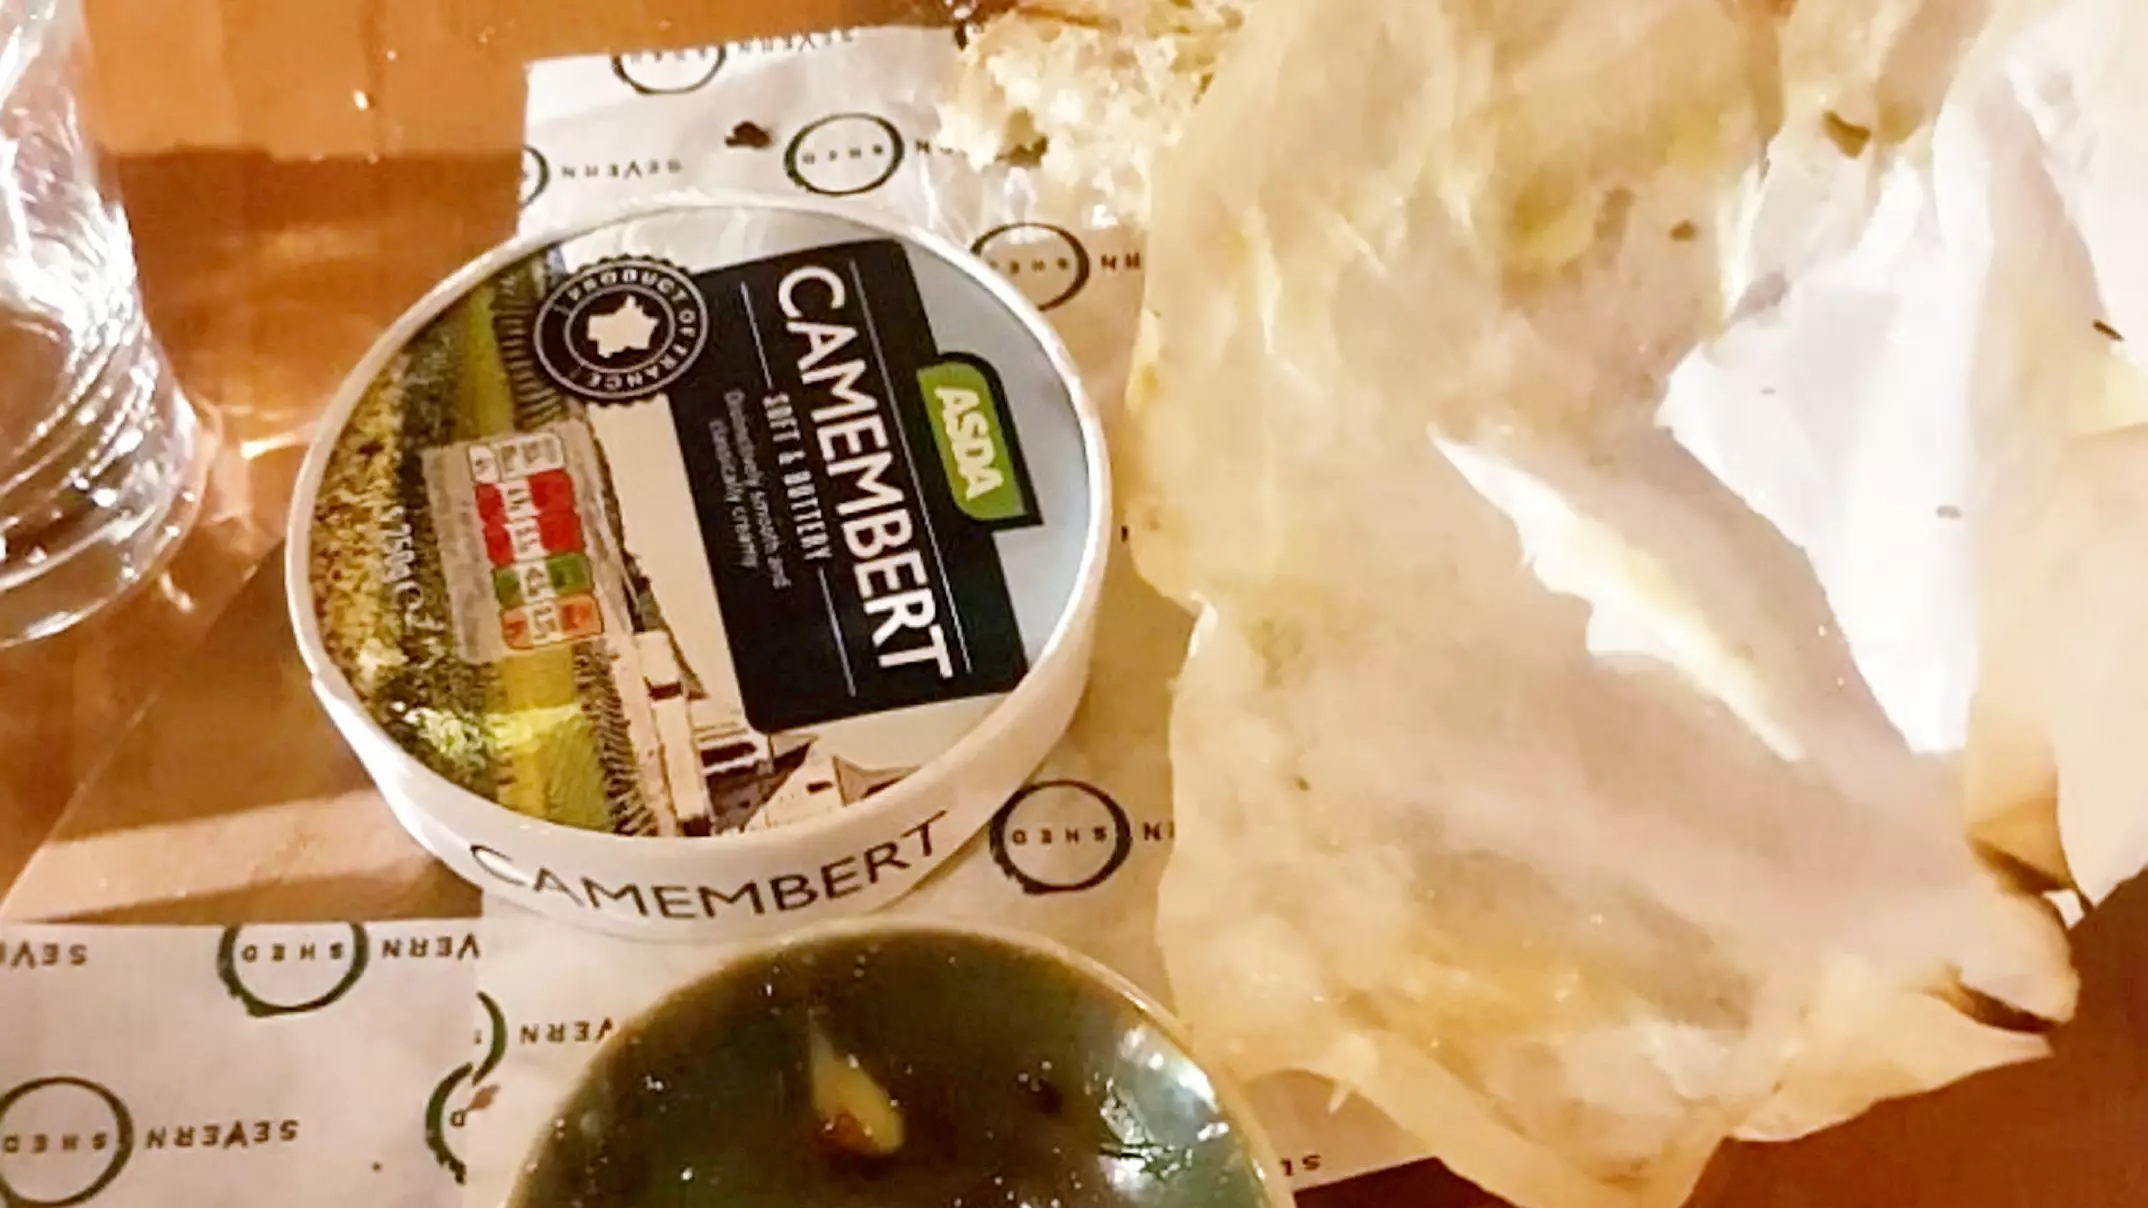 Woman Fuming After £13 Camembert At Restaurant Turns Out To Be £1.15 From Asda